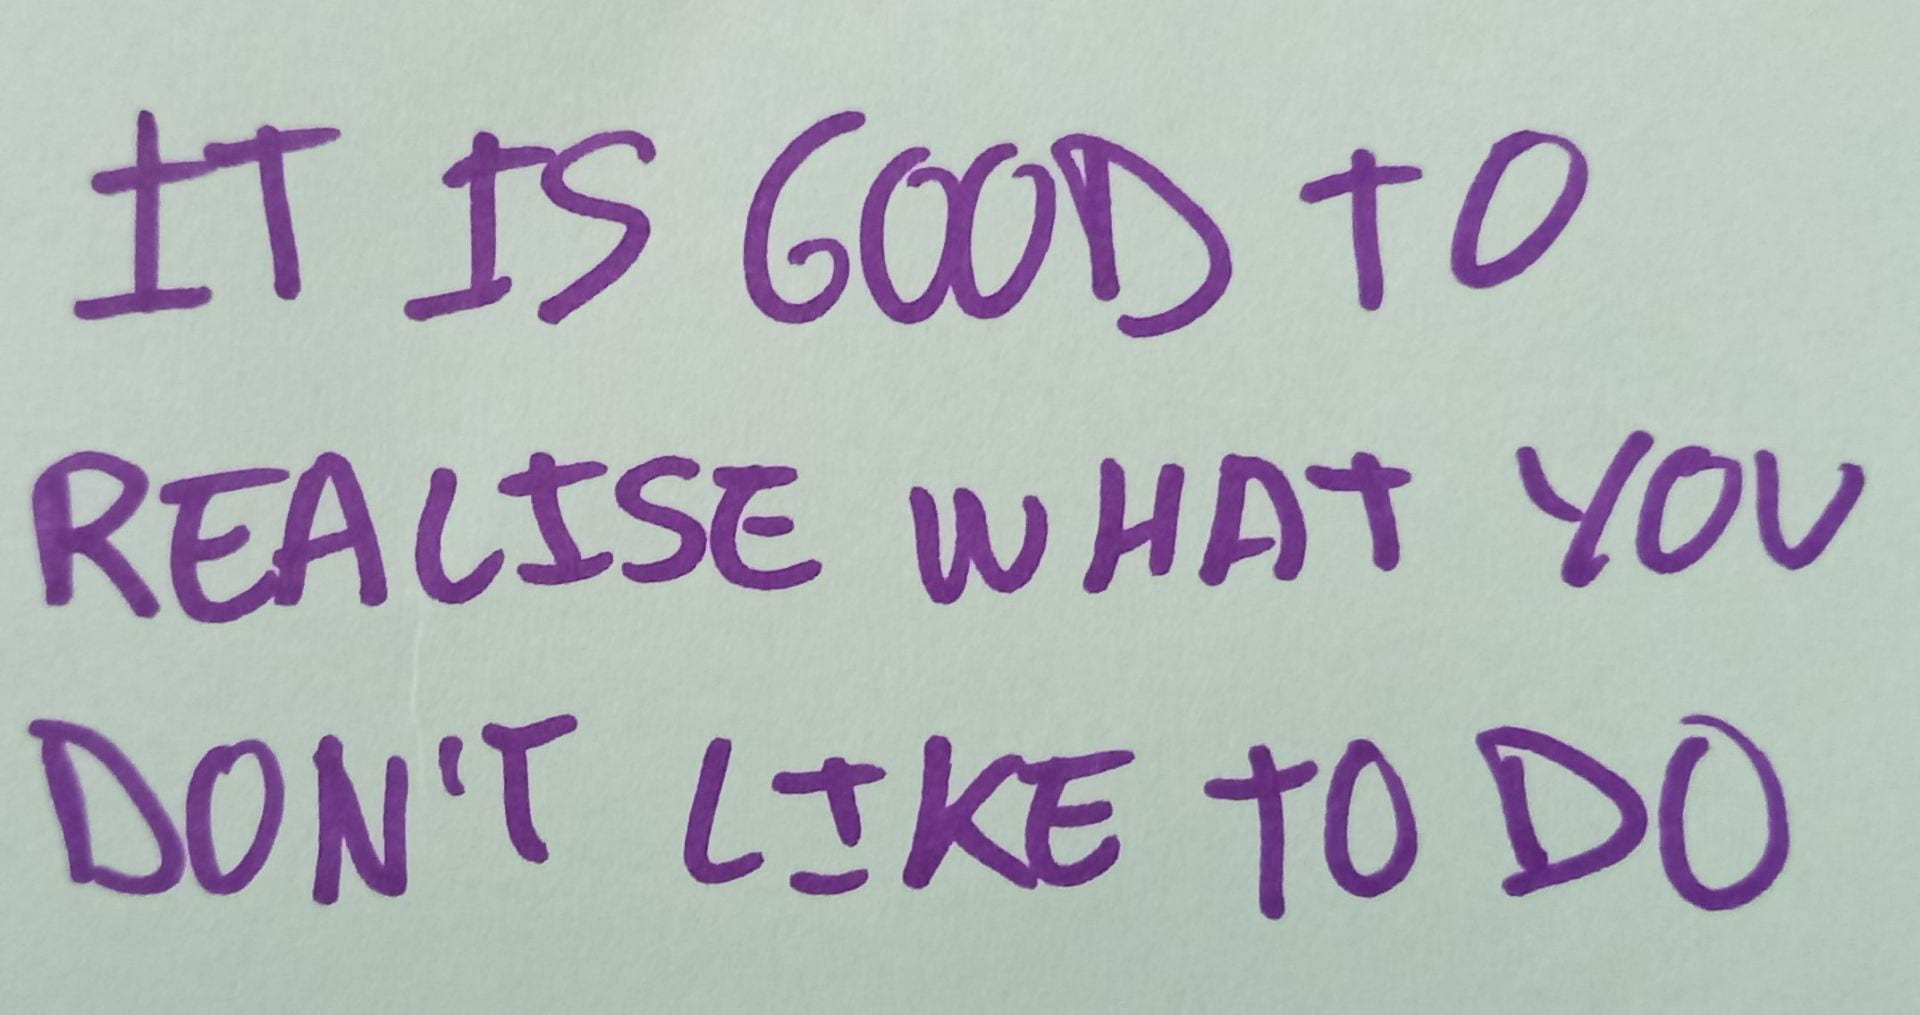 Take-home messages from the Careers Beyond Research event: It is good to realise what you don't like to do.